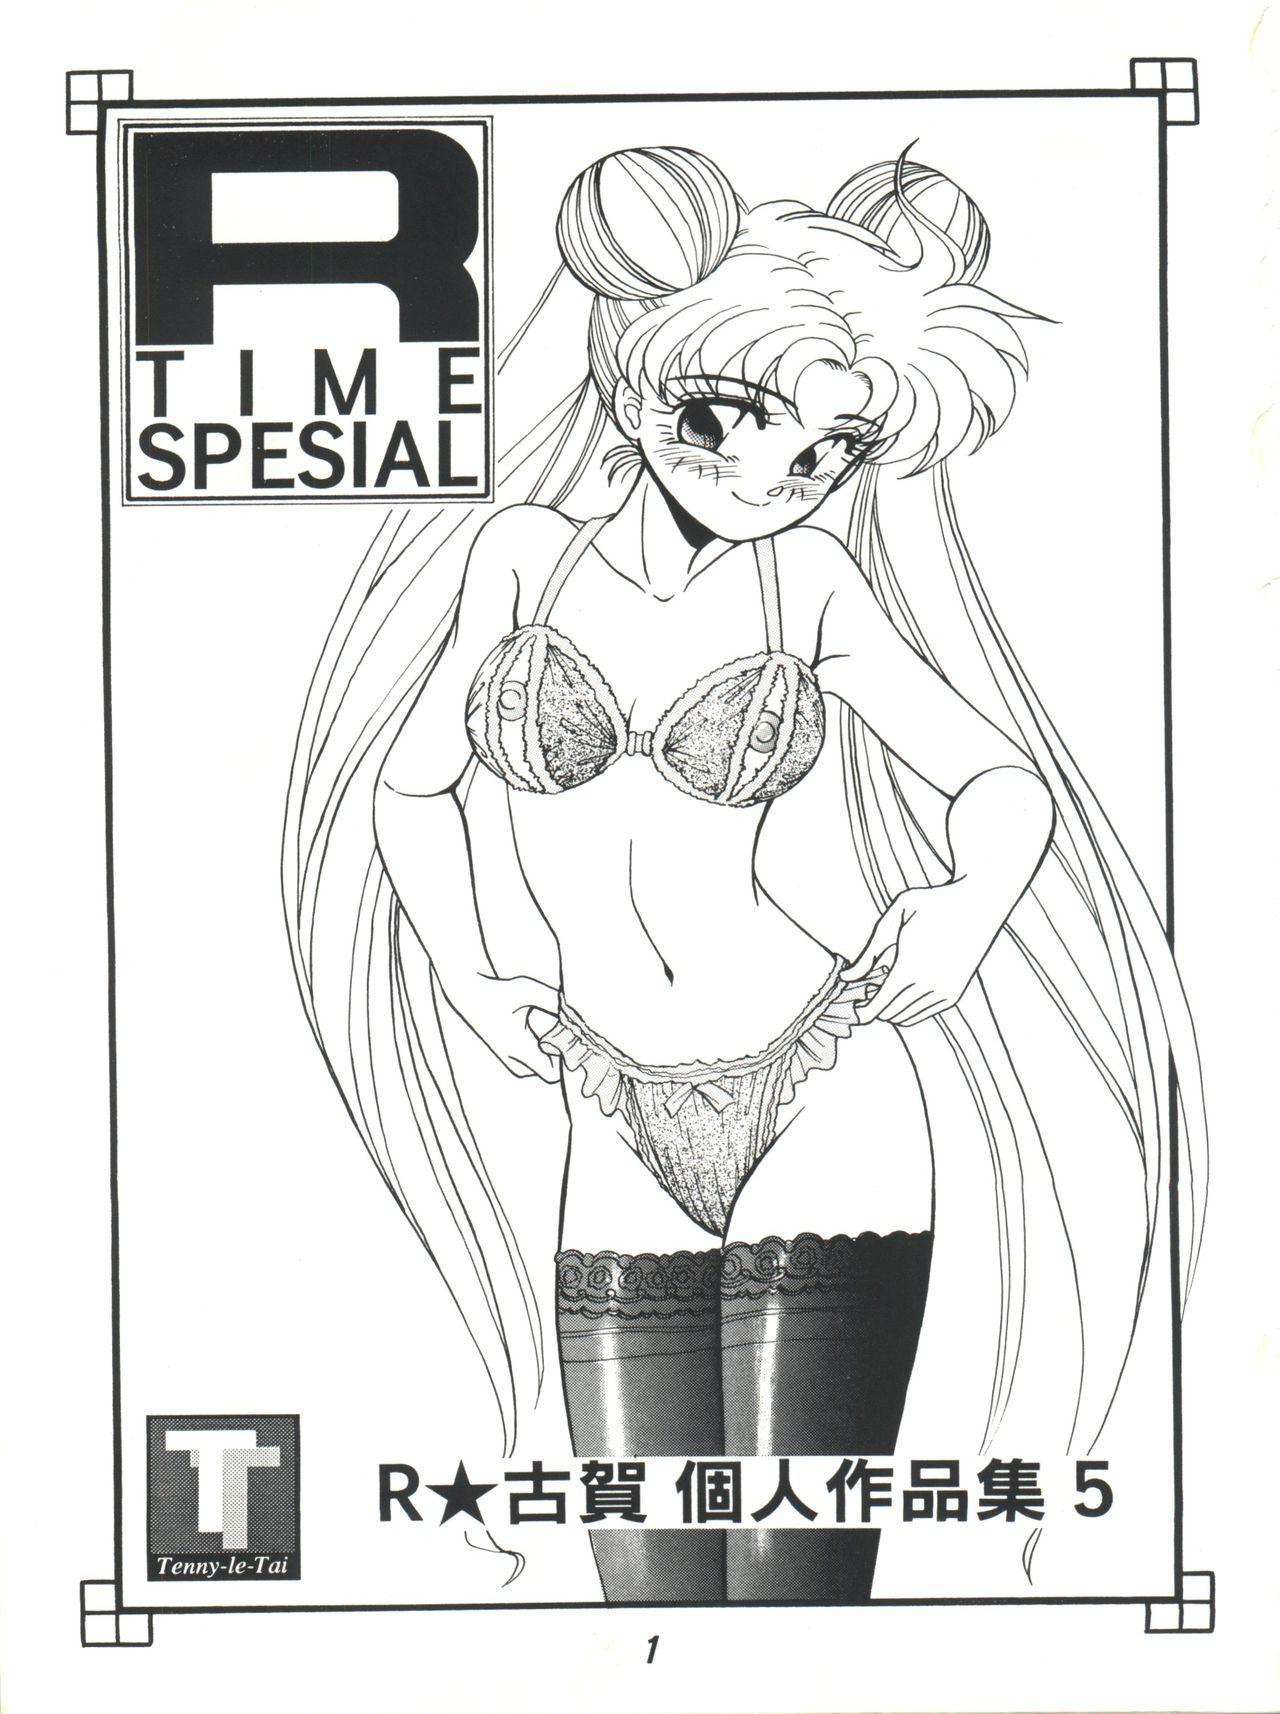 Amateurs Gone Wild R Time Special - Sailor moon Ranma 12 3x3 eyes Obi wo gyuttone Big Natural Tits - Picture 3